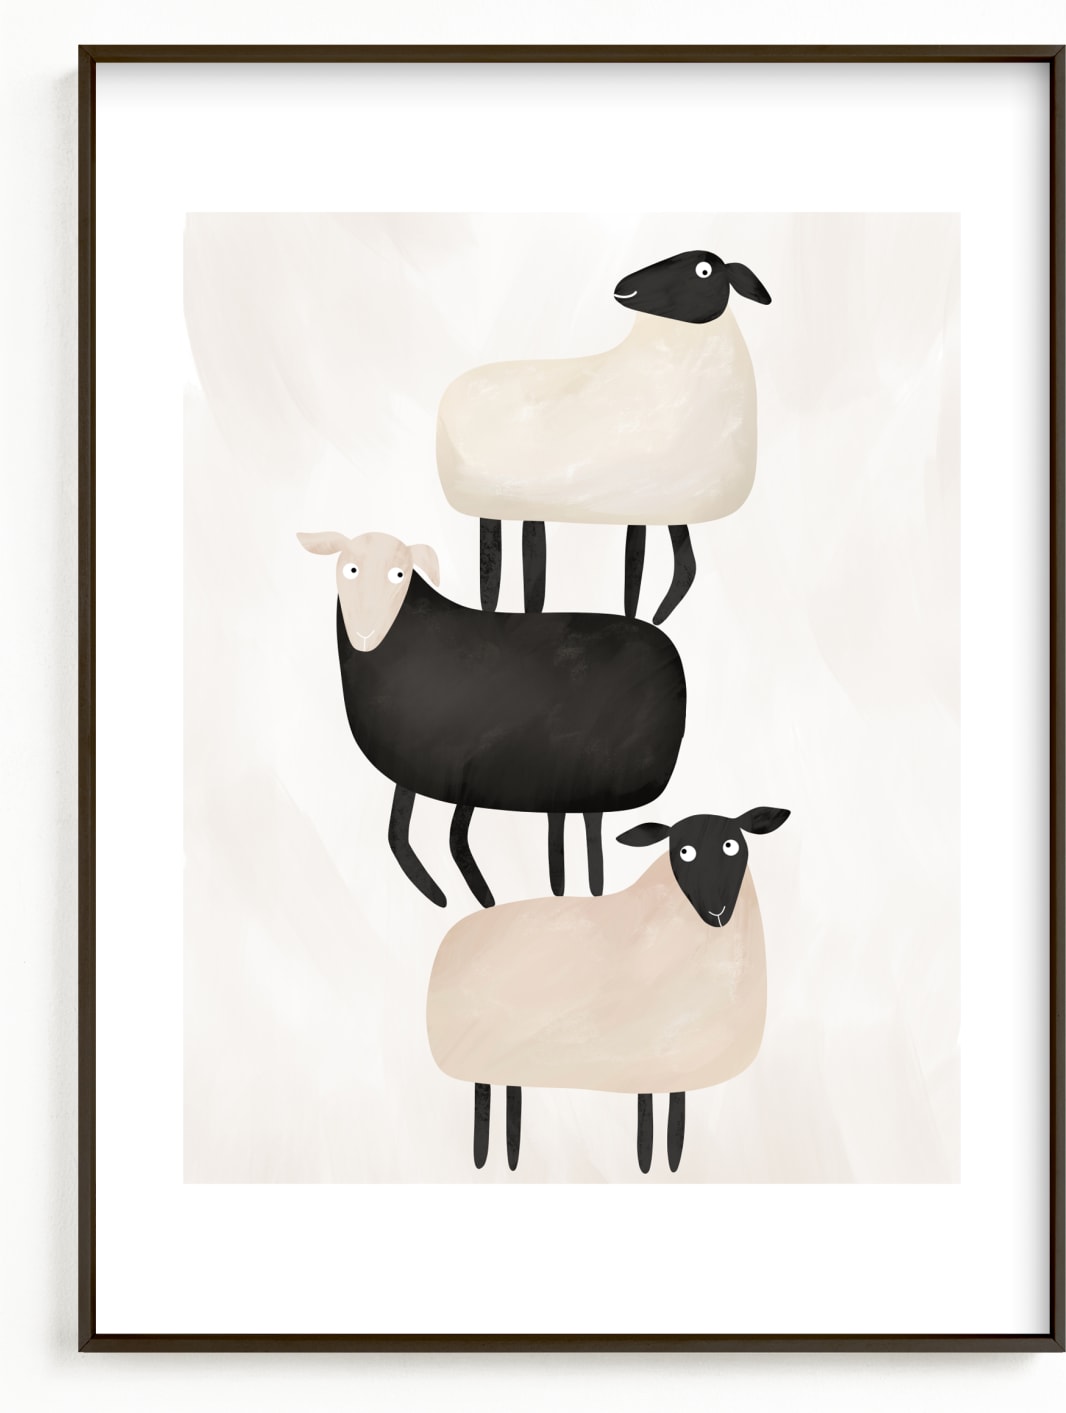 This is a white nursery wall art by Maja Cunningham called I got your back.